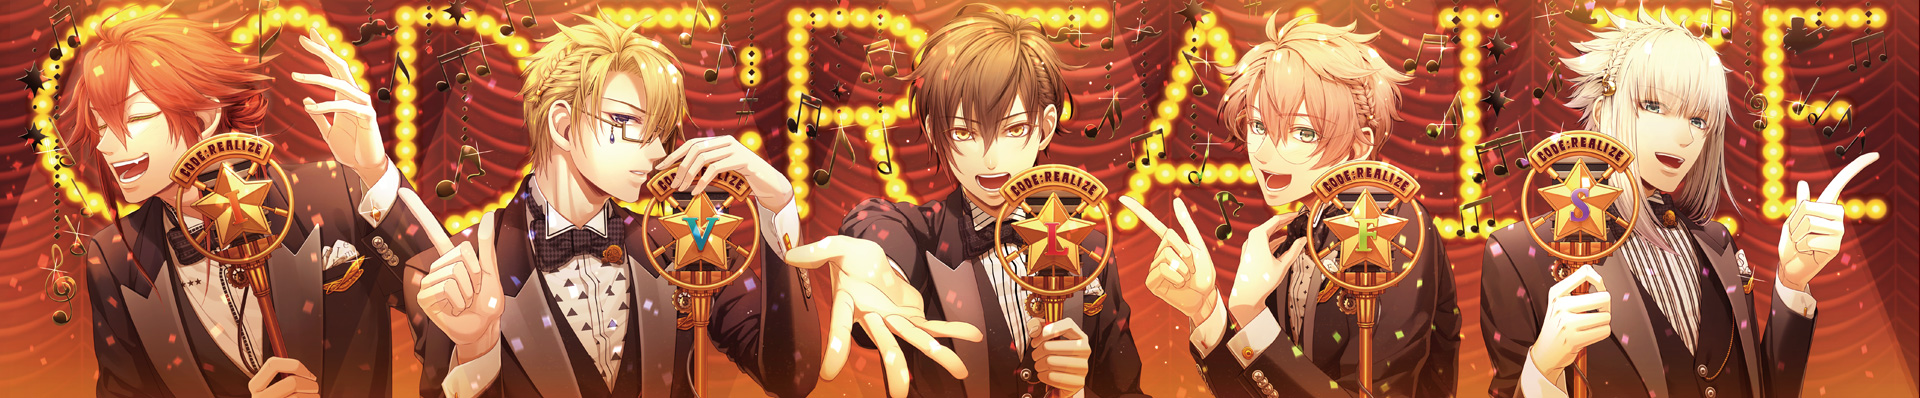 Code：Realize ～創世の姫君～ Character CD ｜ TEAM Entertainment